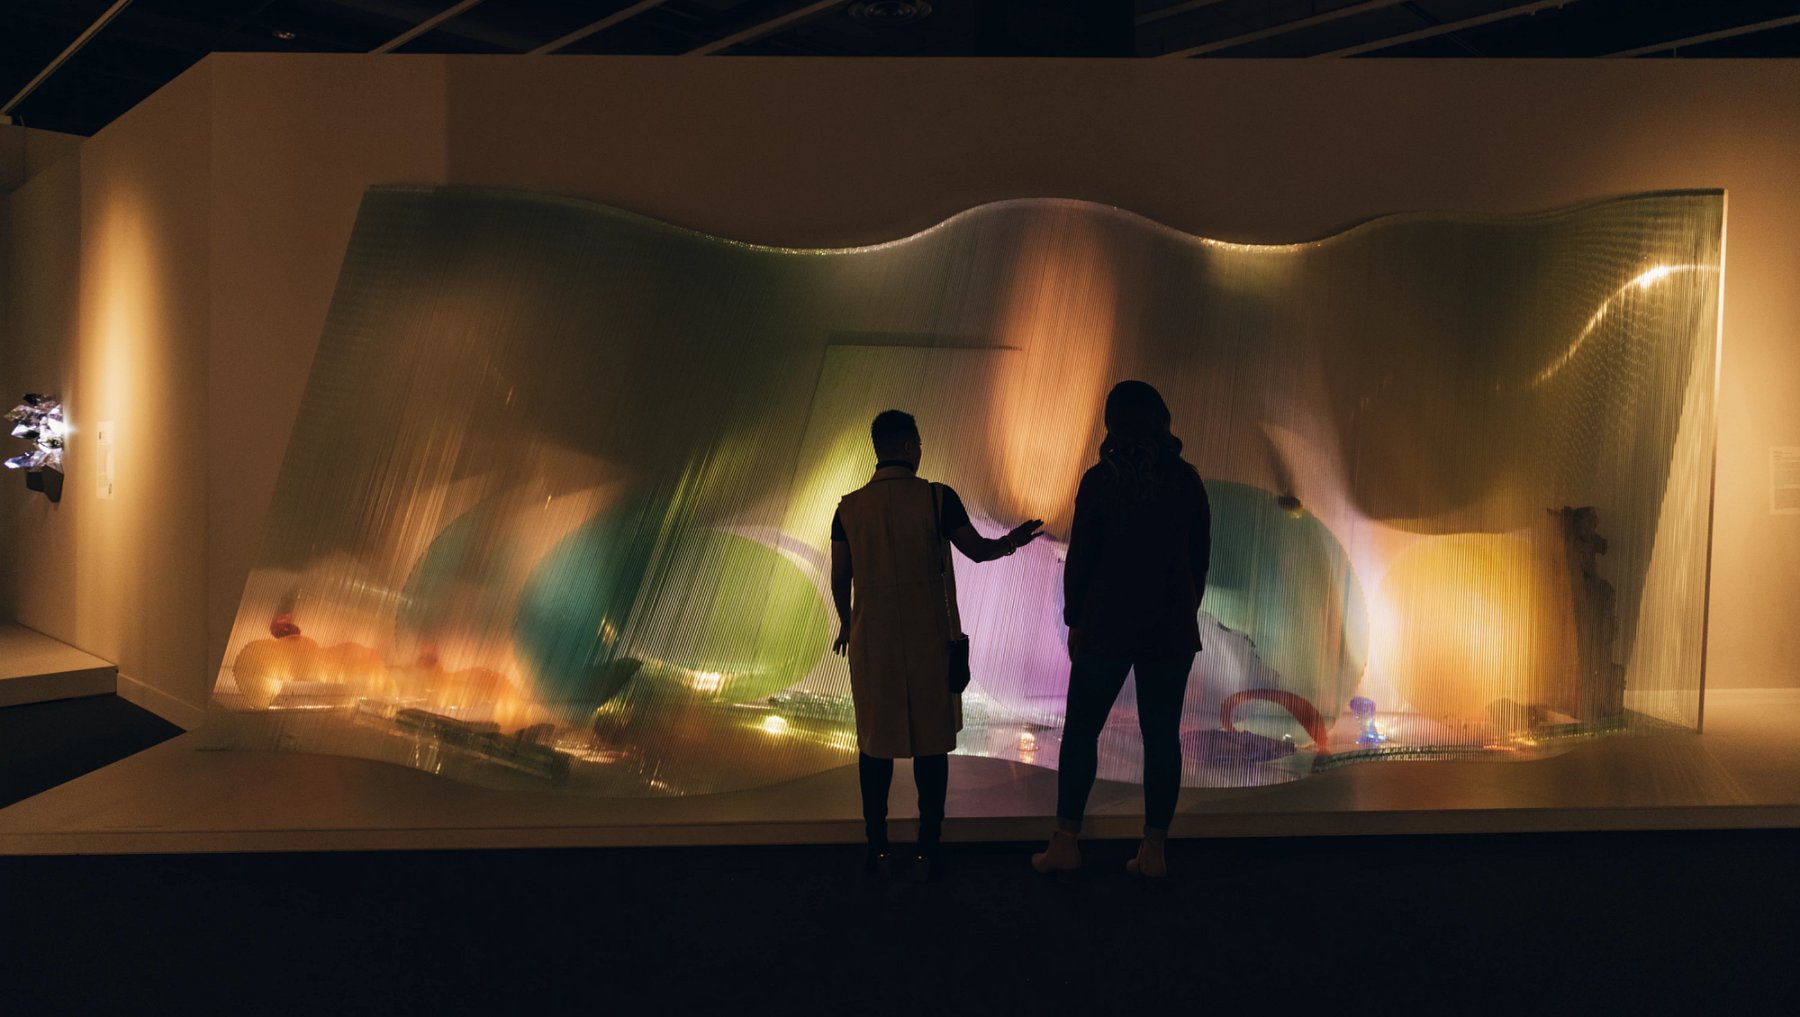 Two people standing in front of large art display in museum